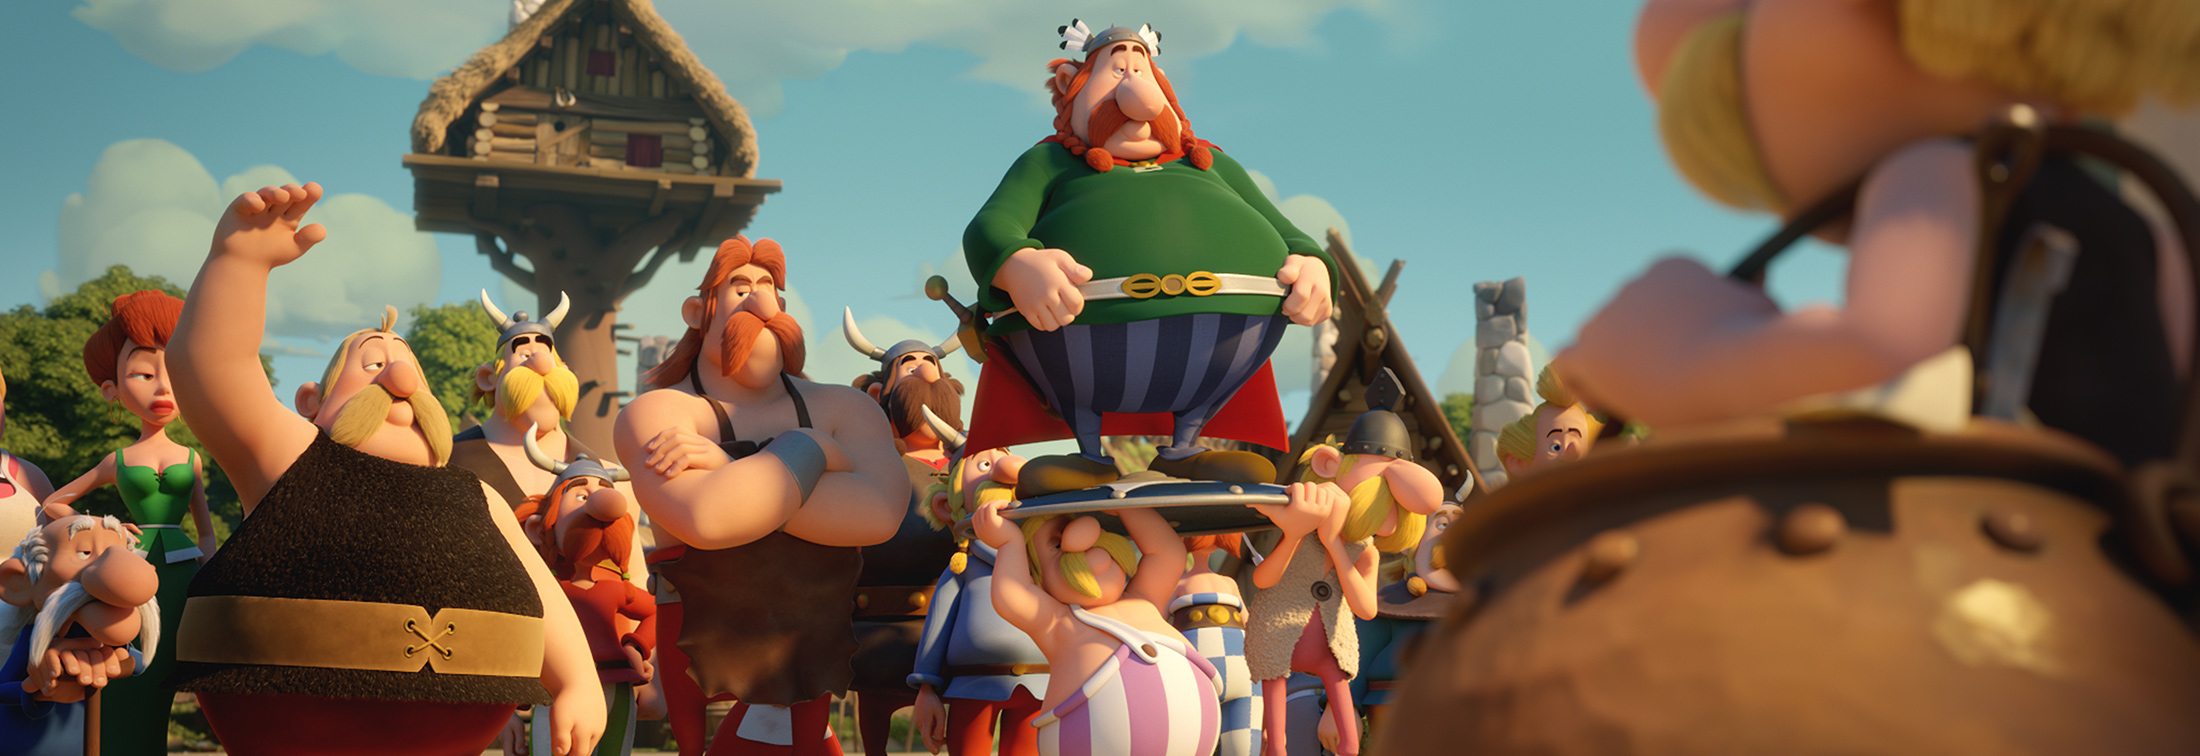 Asterix: The Secret of the Magic Potion - An almighty family animation adventure